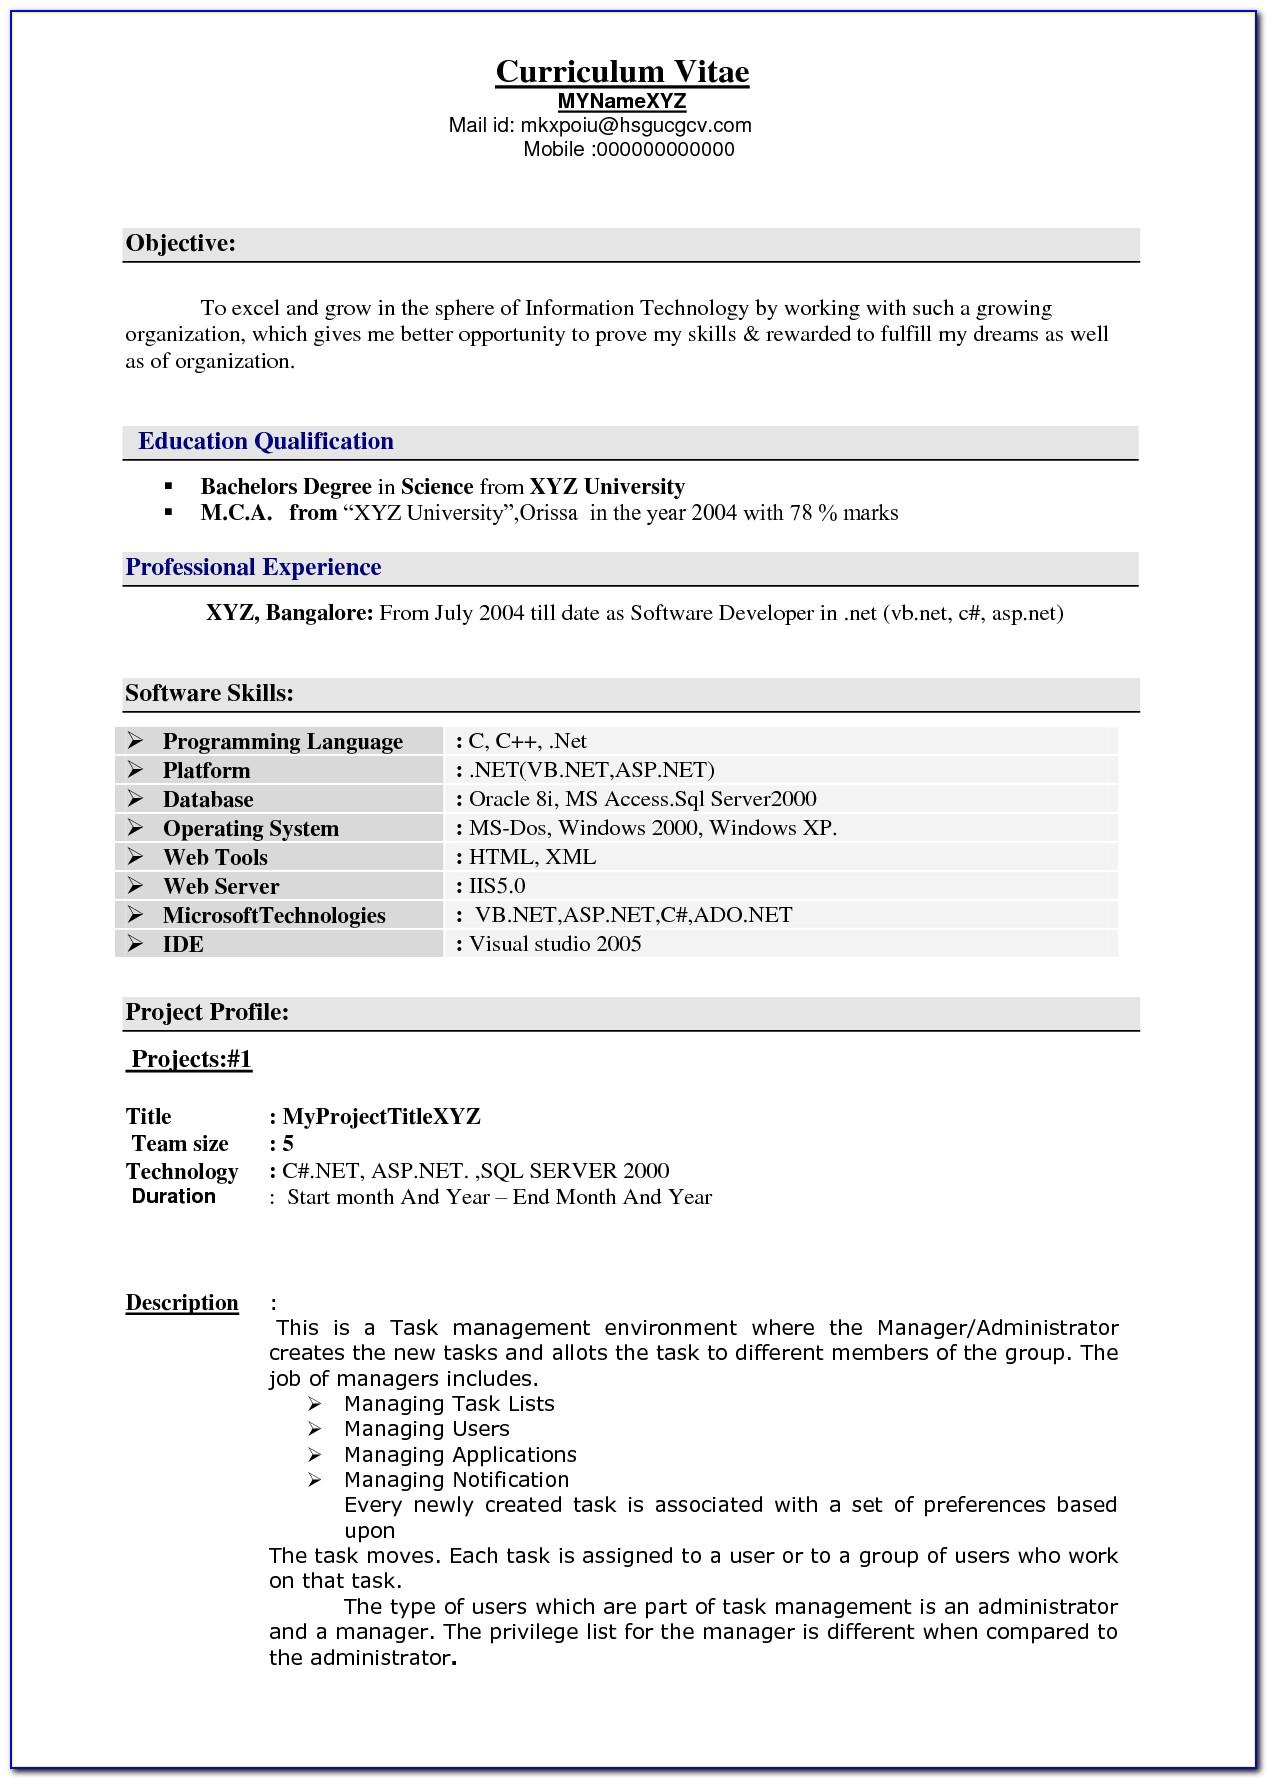 Resume Templates For Marketing Professionals